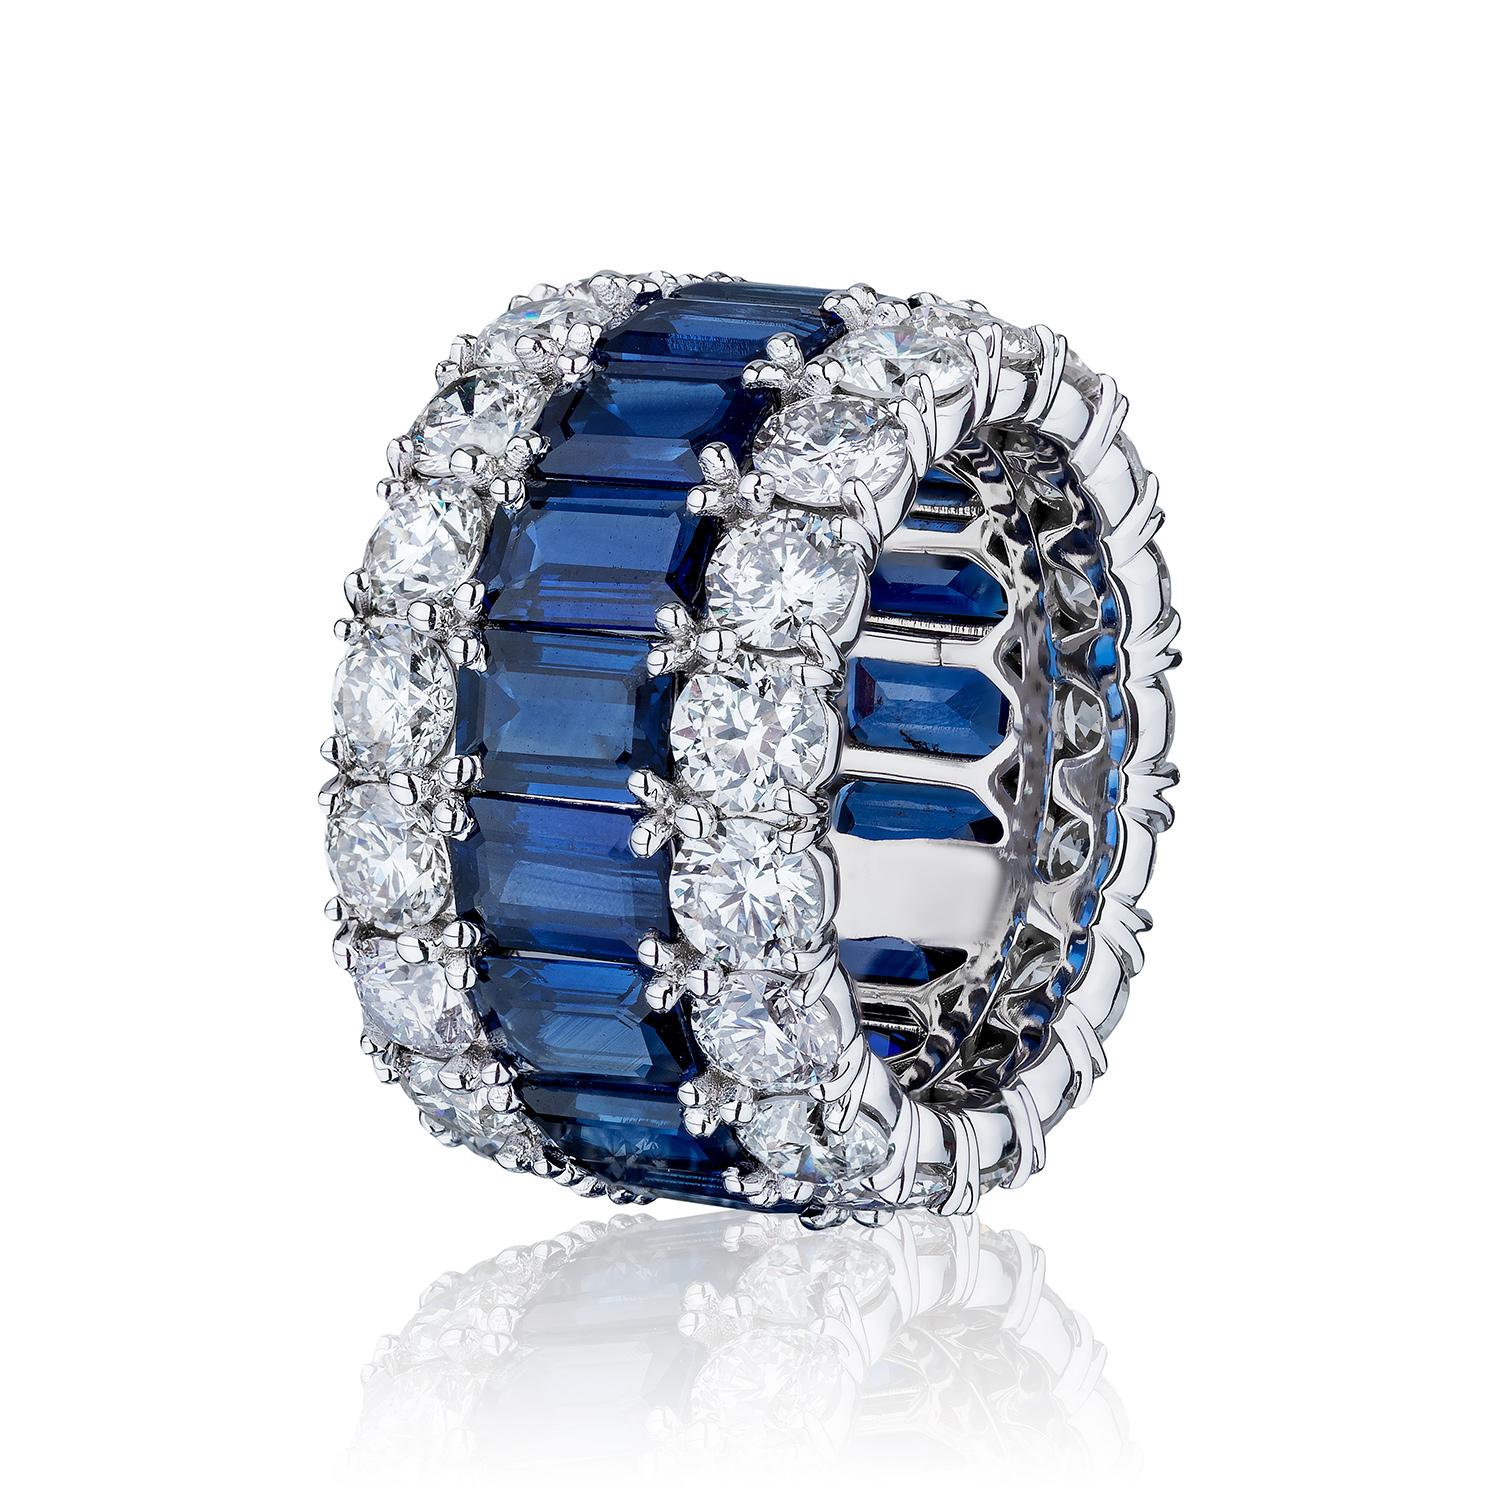 17 Gorgeous Sapphires weighing 10.60 Carats and 34 Round Diamonds weighing 7.02 Carats.

Set in 18 Karat White Gold.

Also available in Rubies and Pink Sapphire